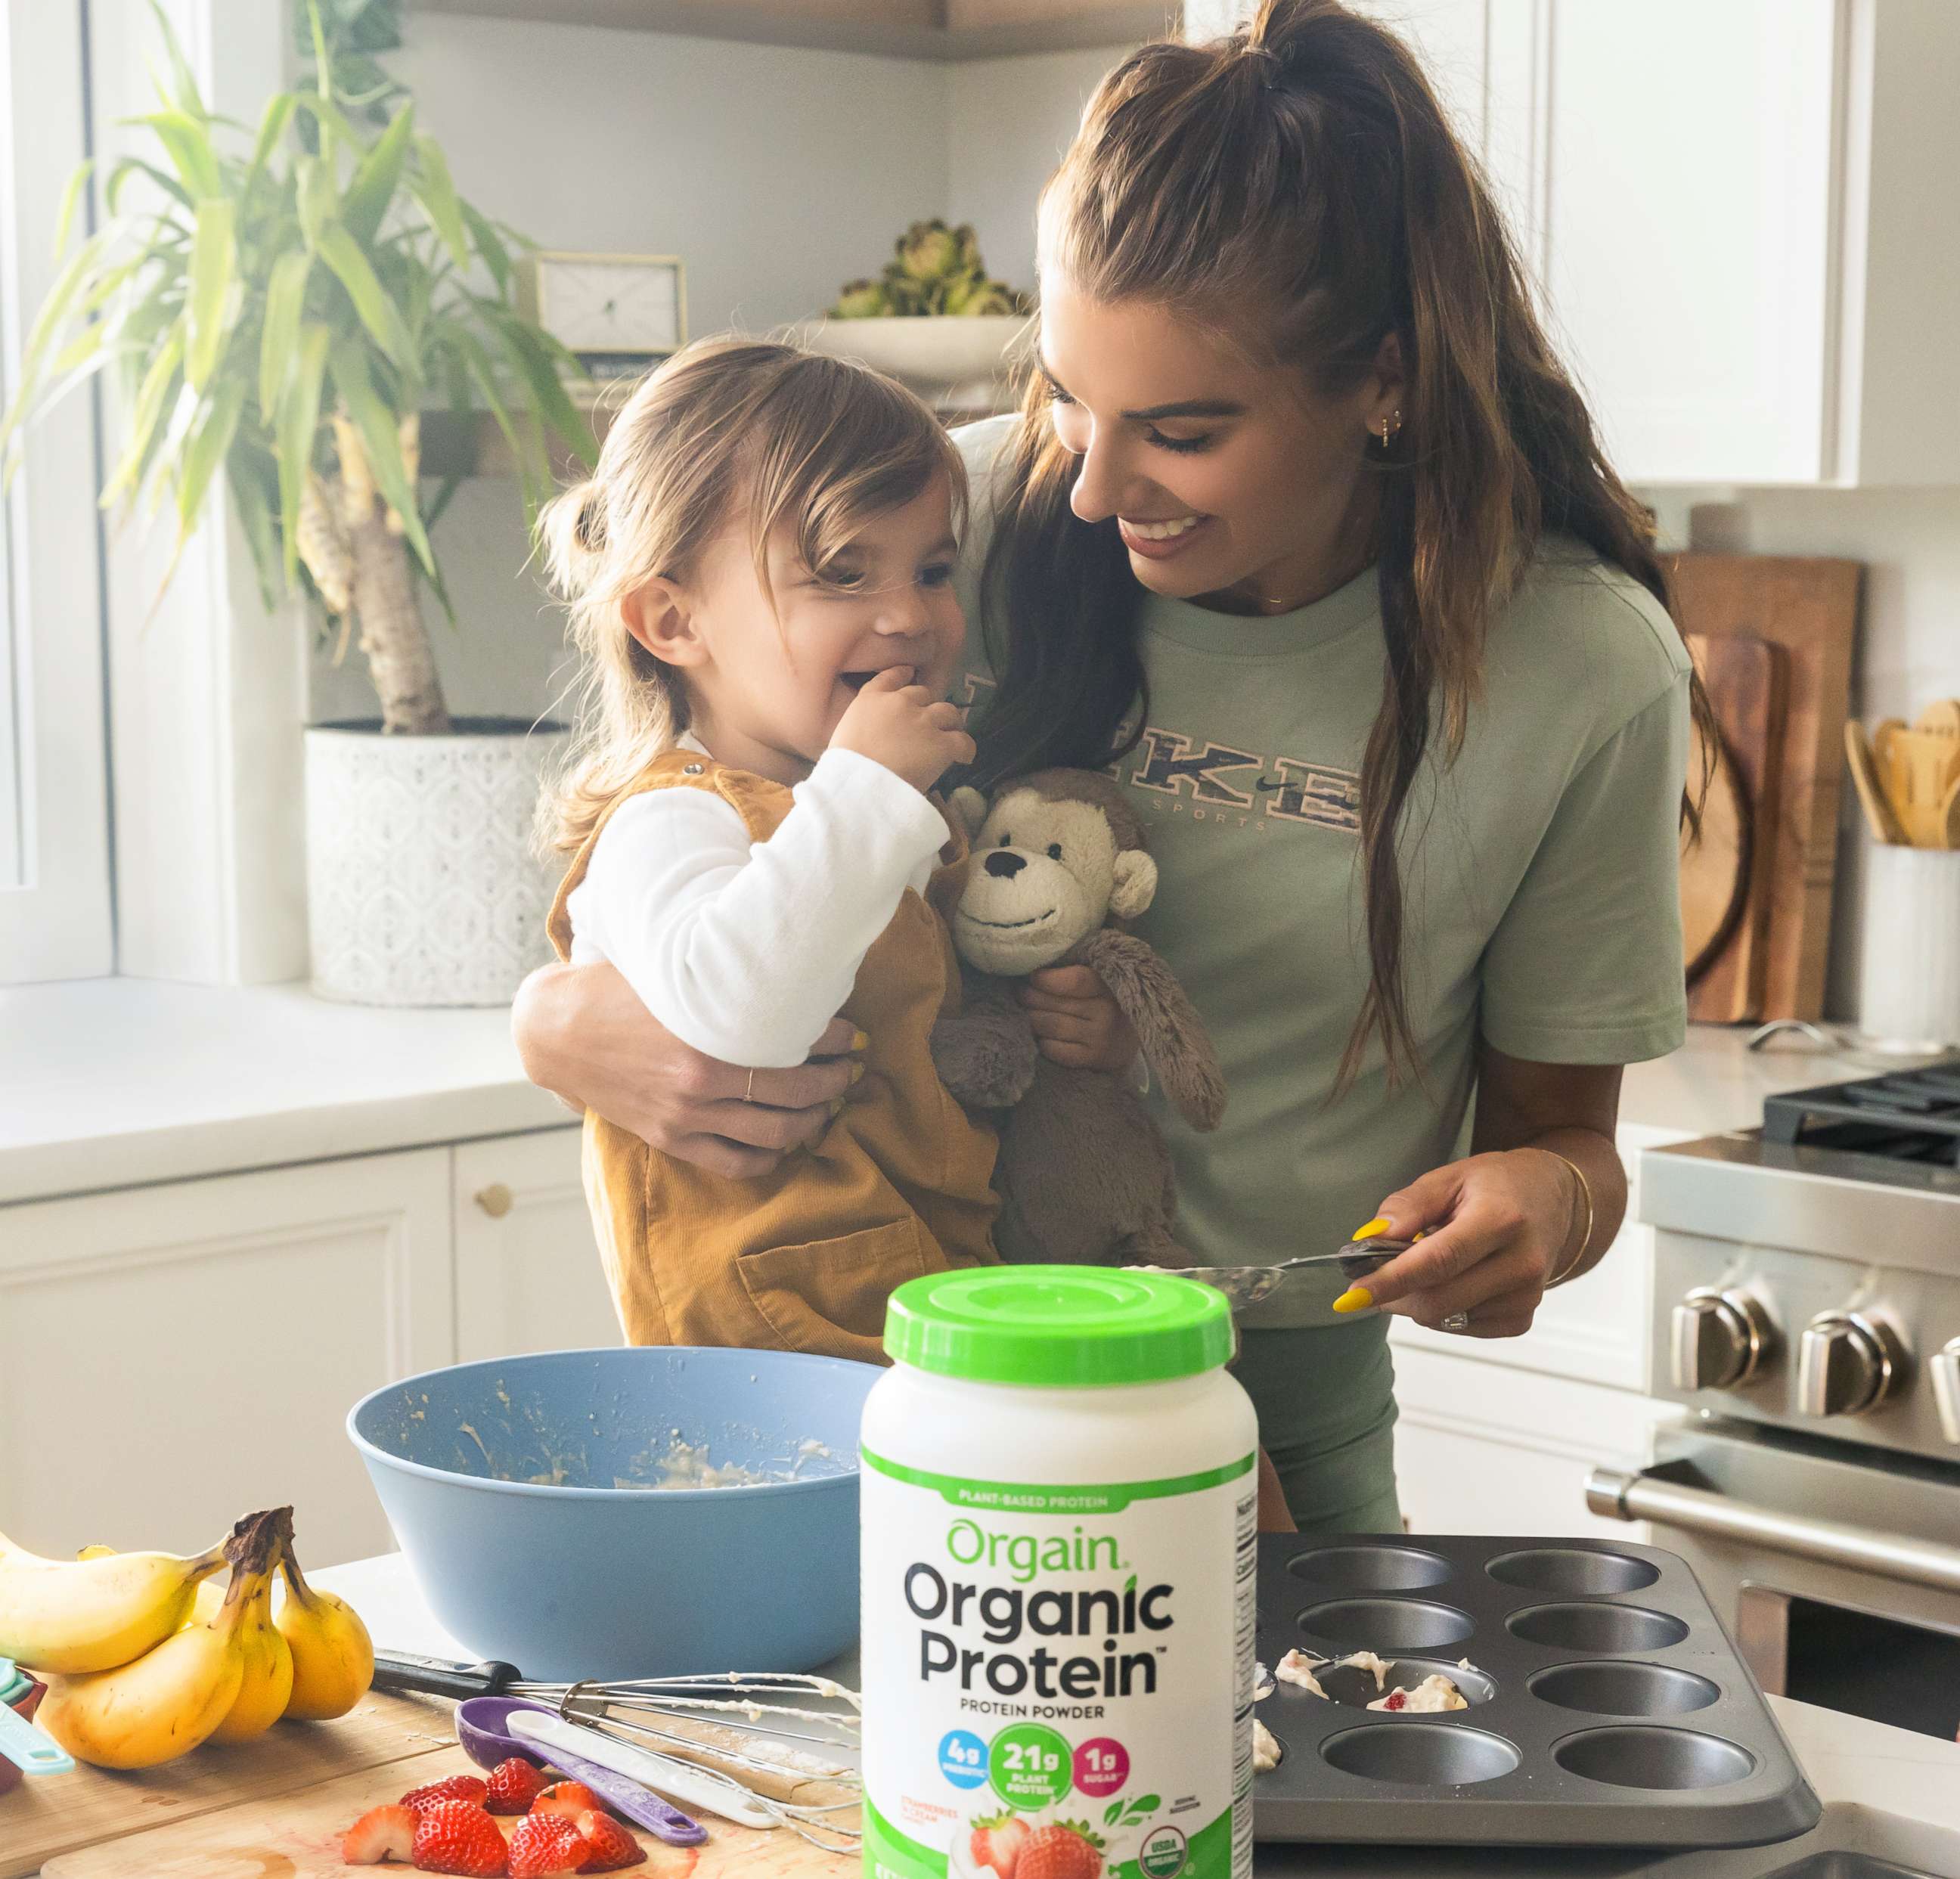 PHOTO: Alex Morgan with her daughter Charlie baking protein snacks in the kitchen.